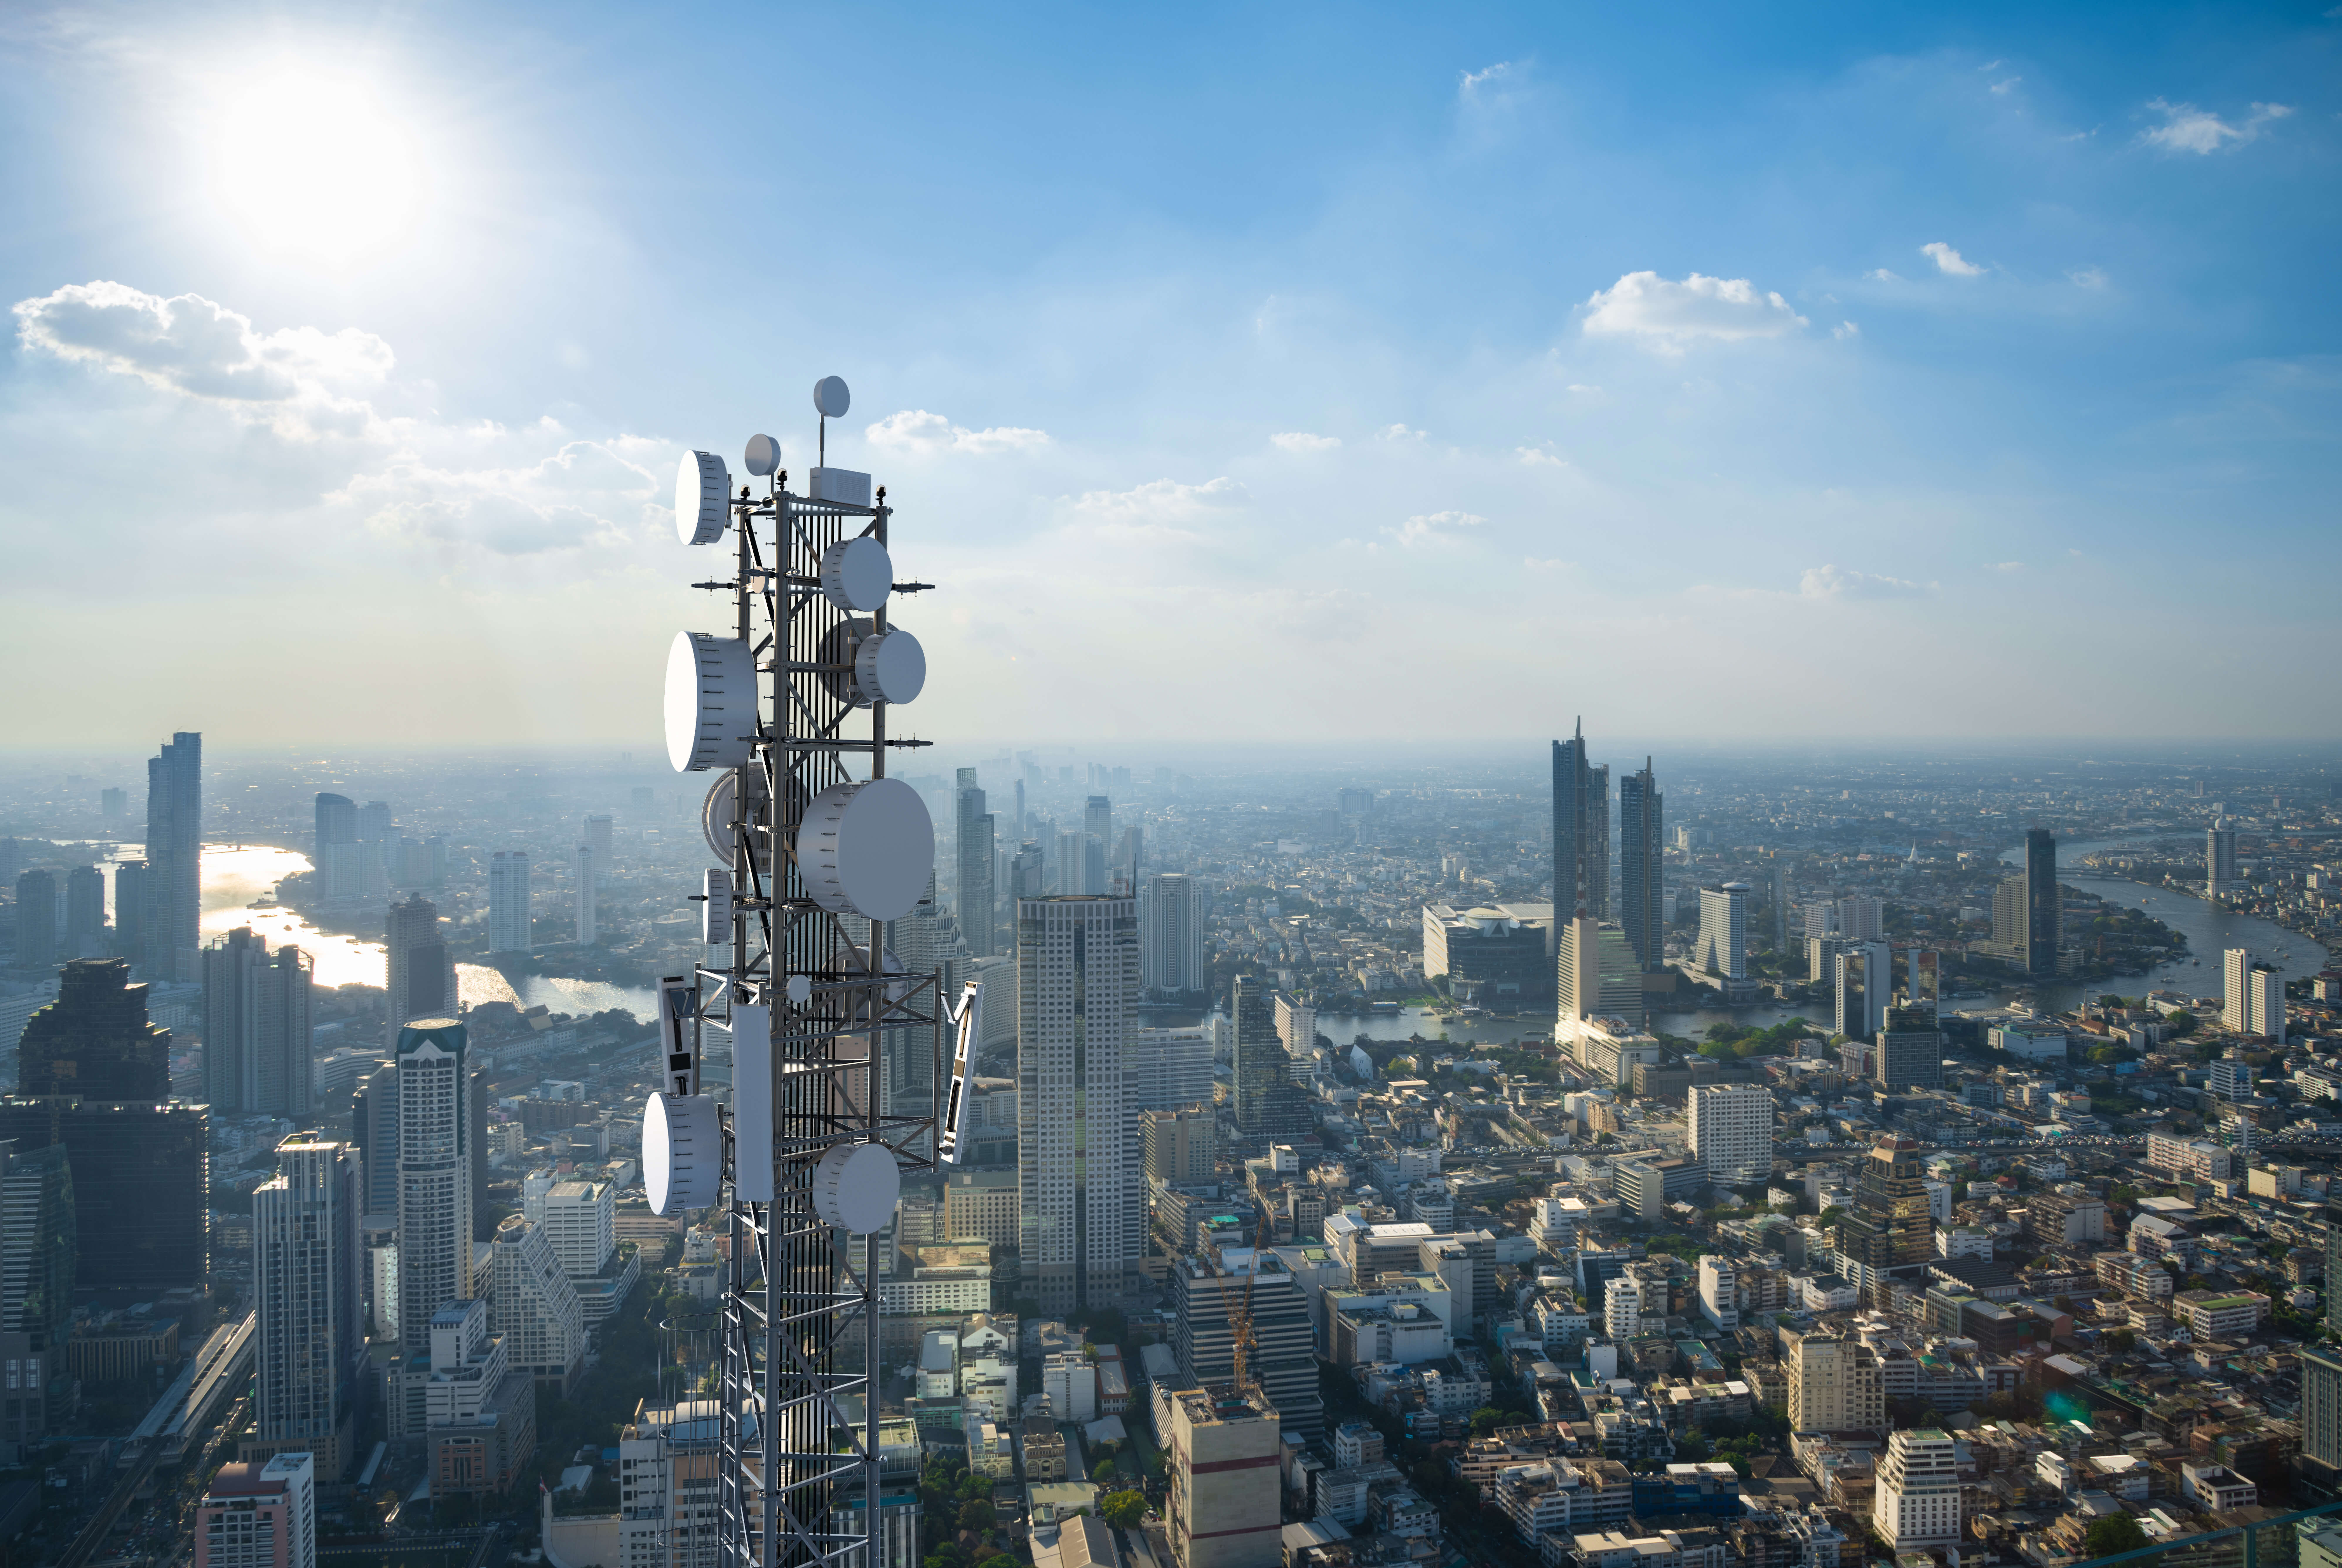 From changes to smartphone vendors’ landscape to telco hyperscallers and 5G, here are the top telecom trends to watch for next year.